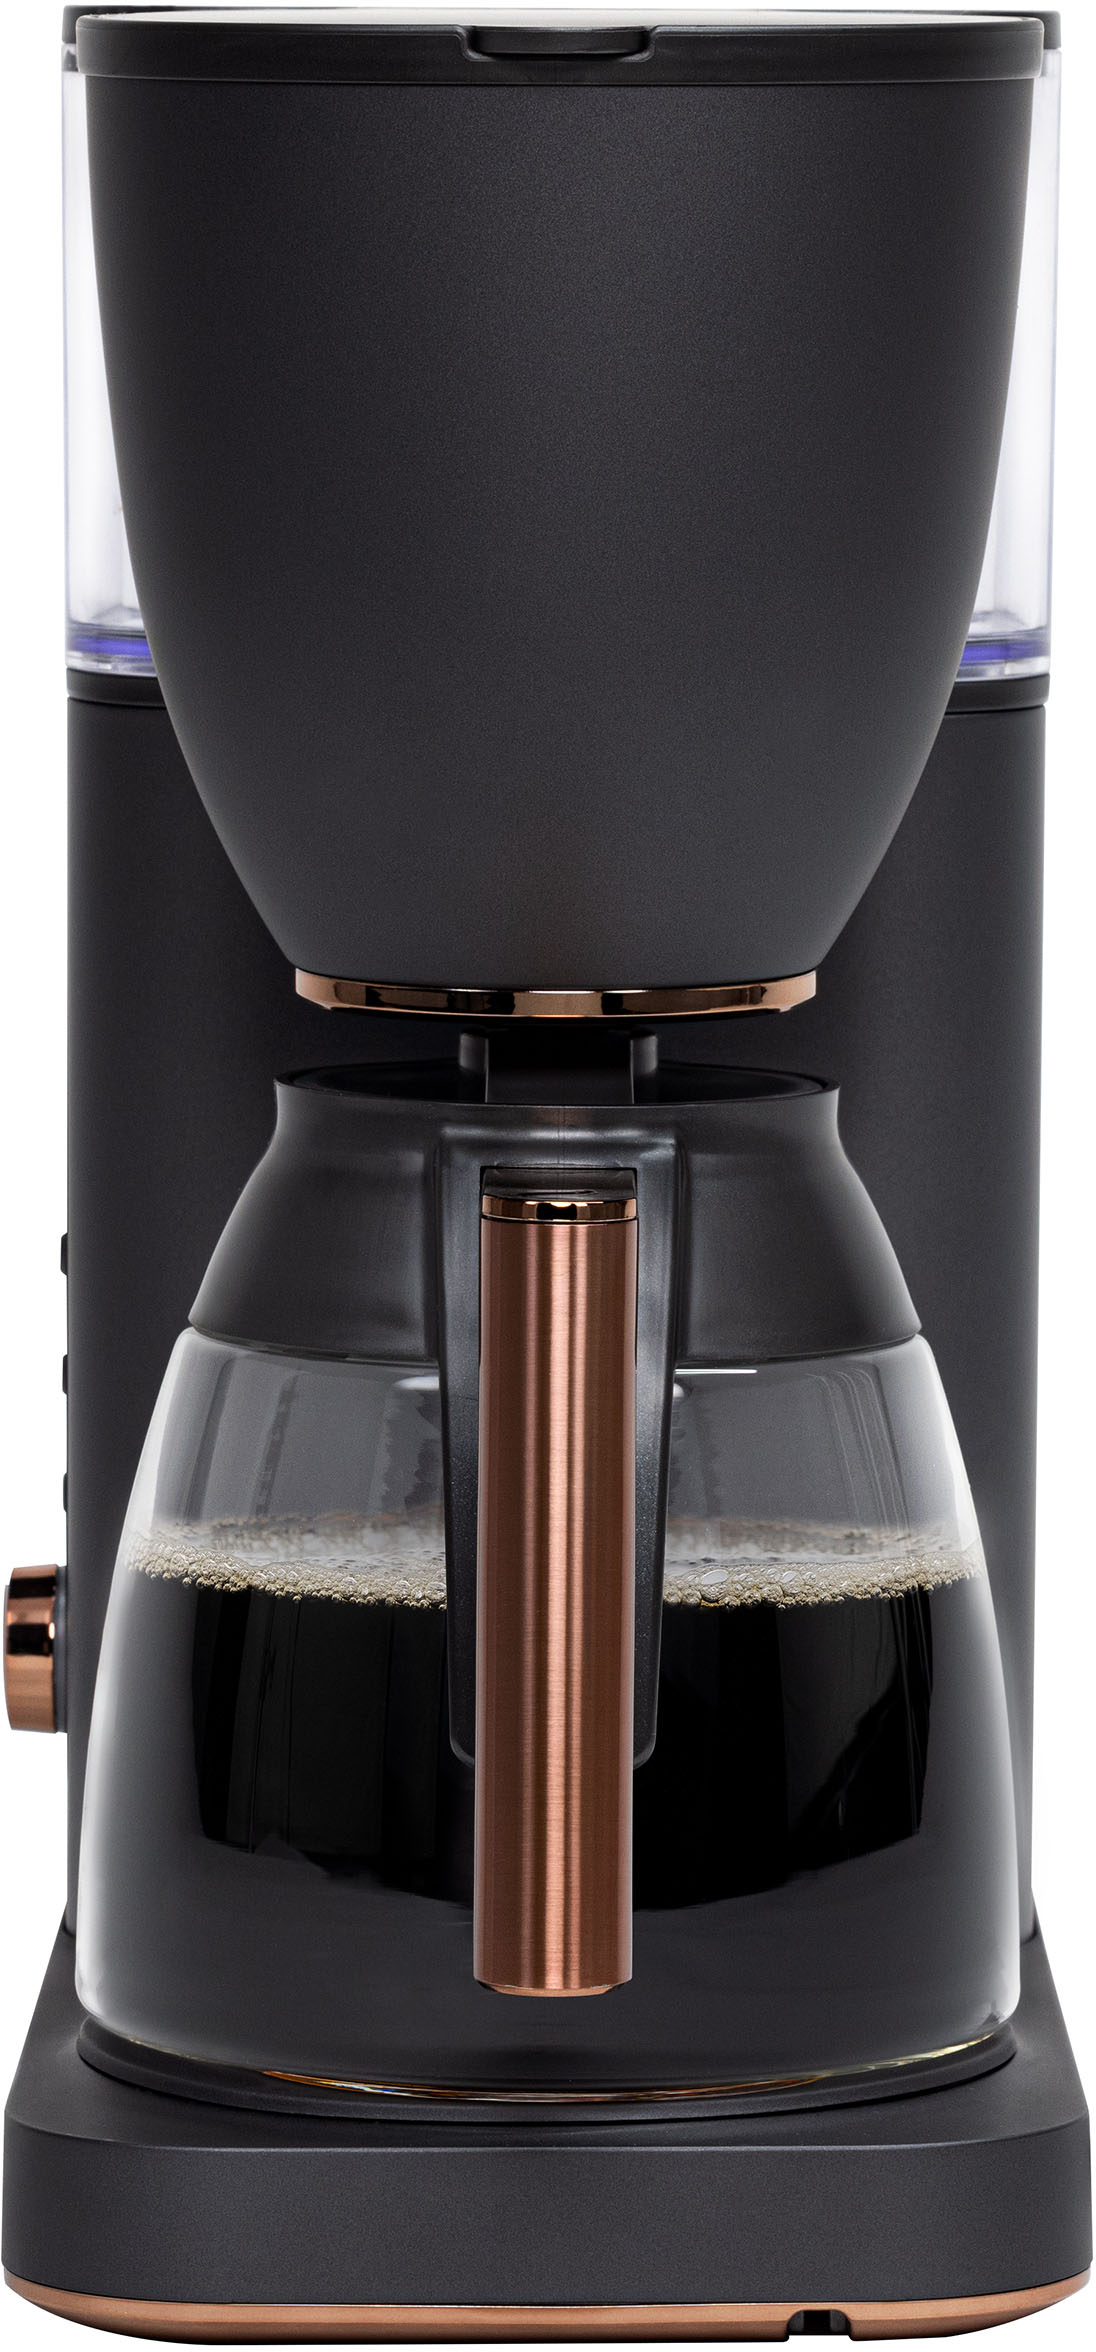 Café Smart Drip 10-Cup Coffee Maker with WiFi Stainless Steel C7CDABS2RS3 -  Best Buy